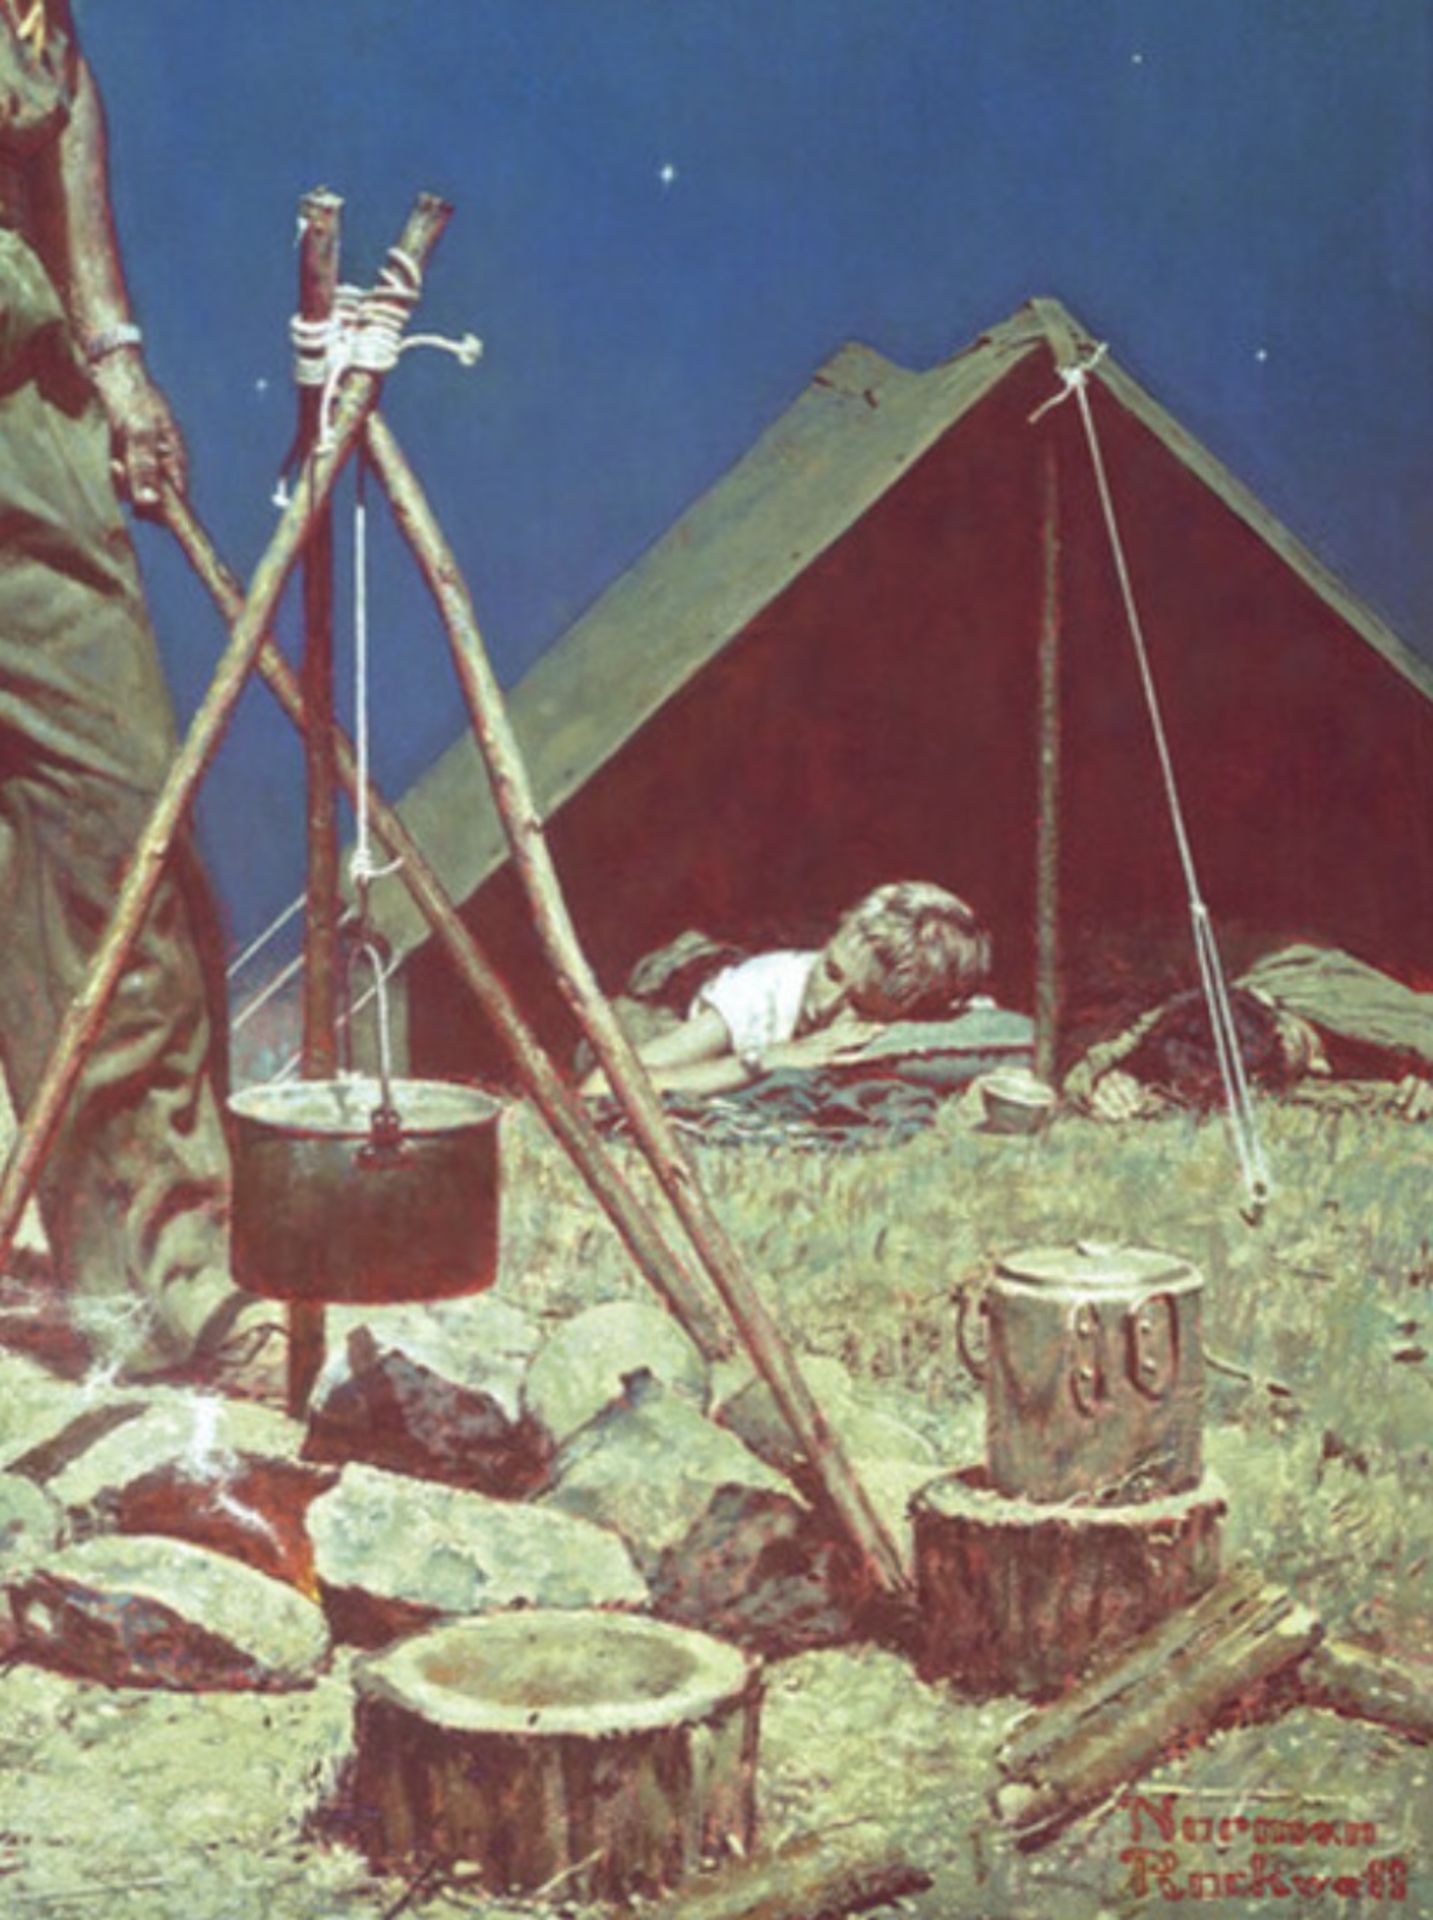 Norman Rockwell "The Scoutmaster, 1956" Offset Lithograph - Image 5 of 5